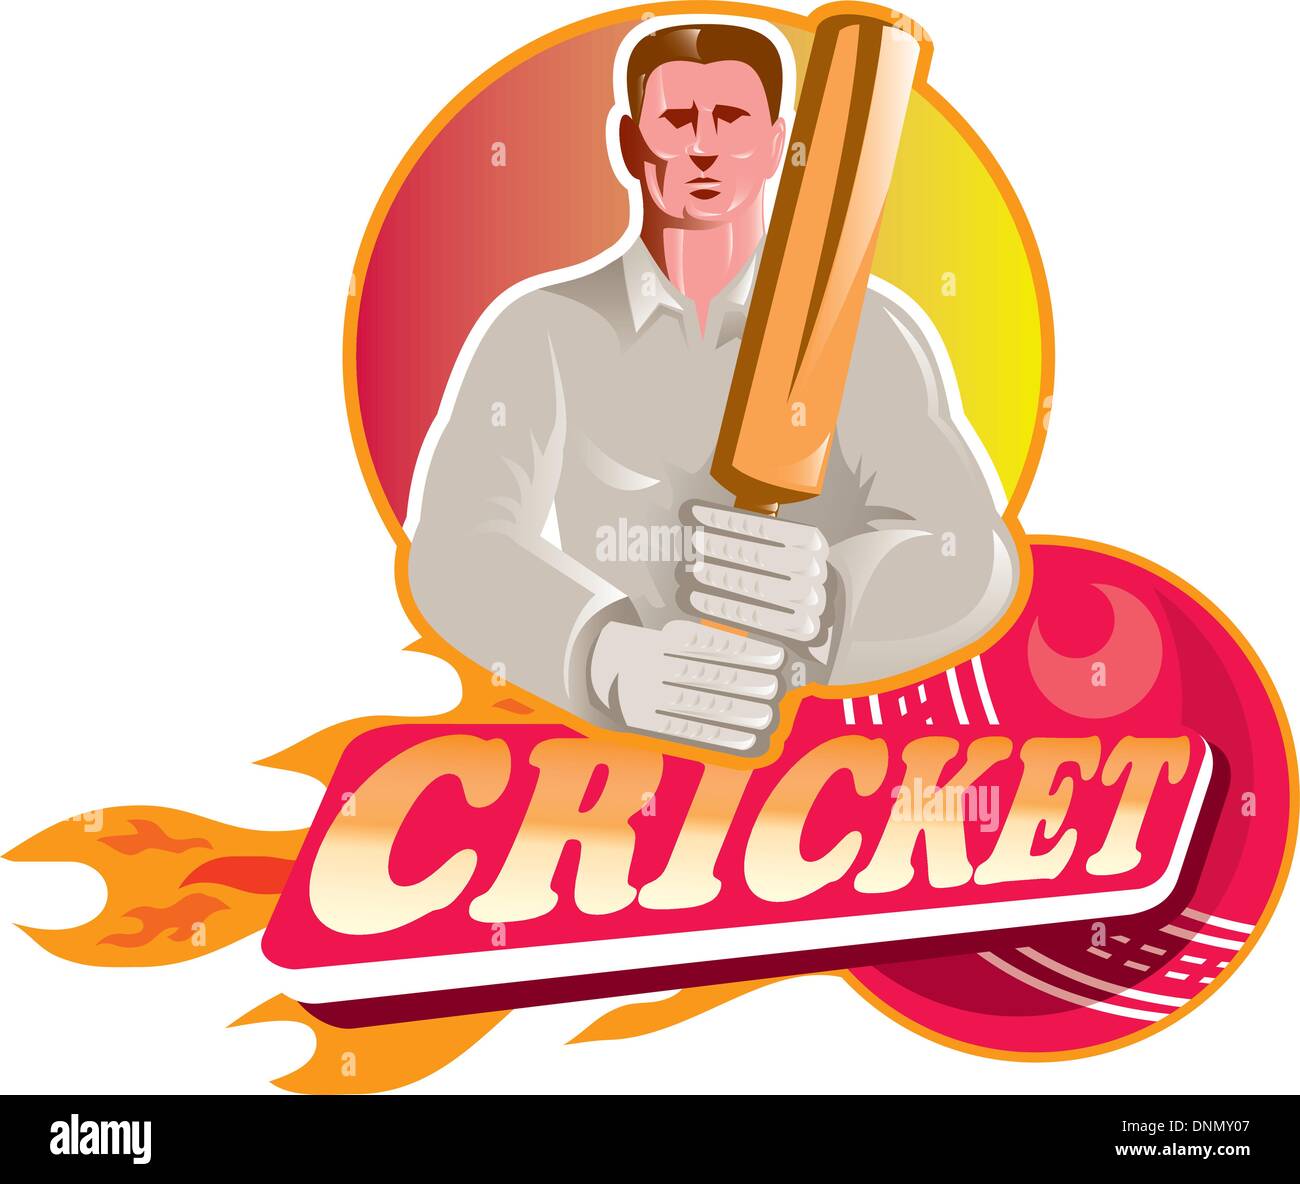 illustration of a cricket player batsman with bat front view on isolated background with flaming ball and word cricket Stock Vector